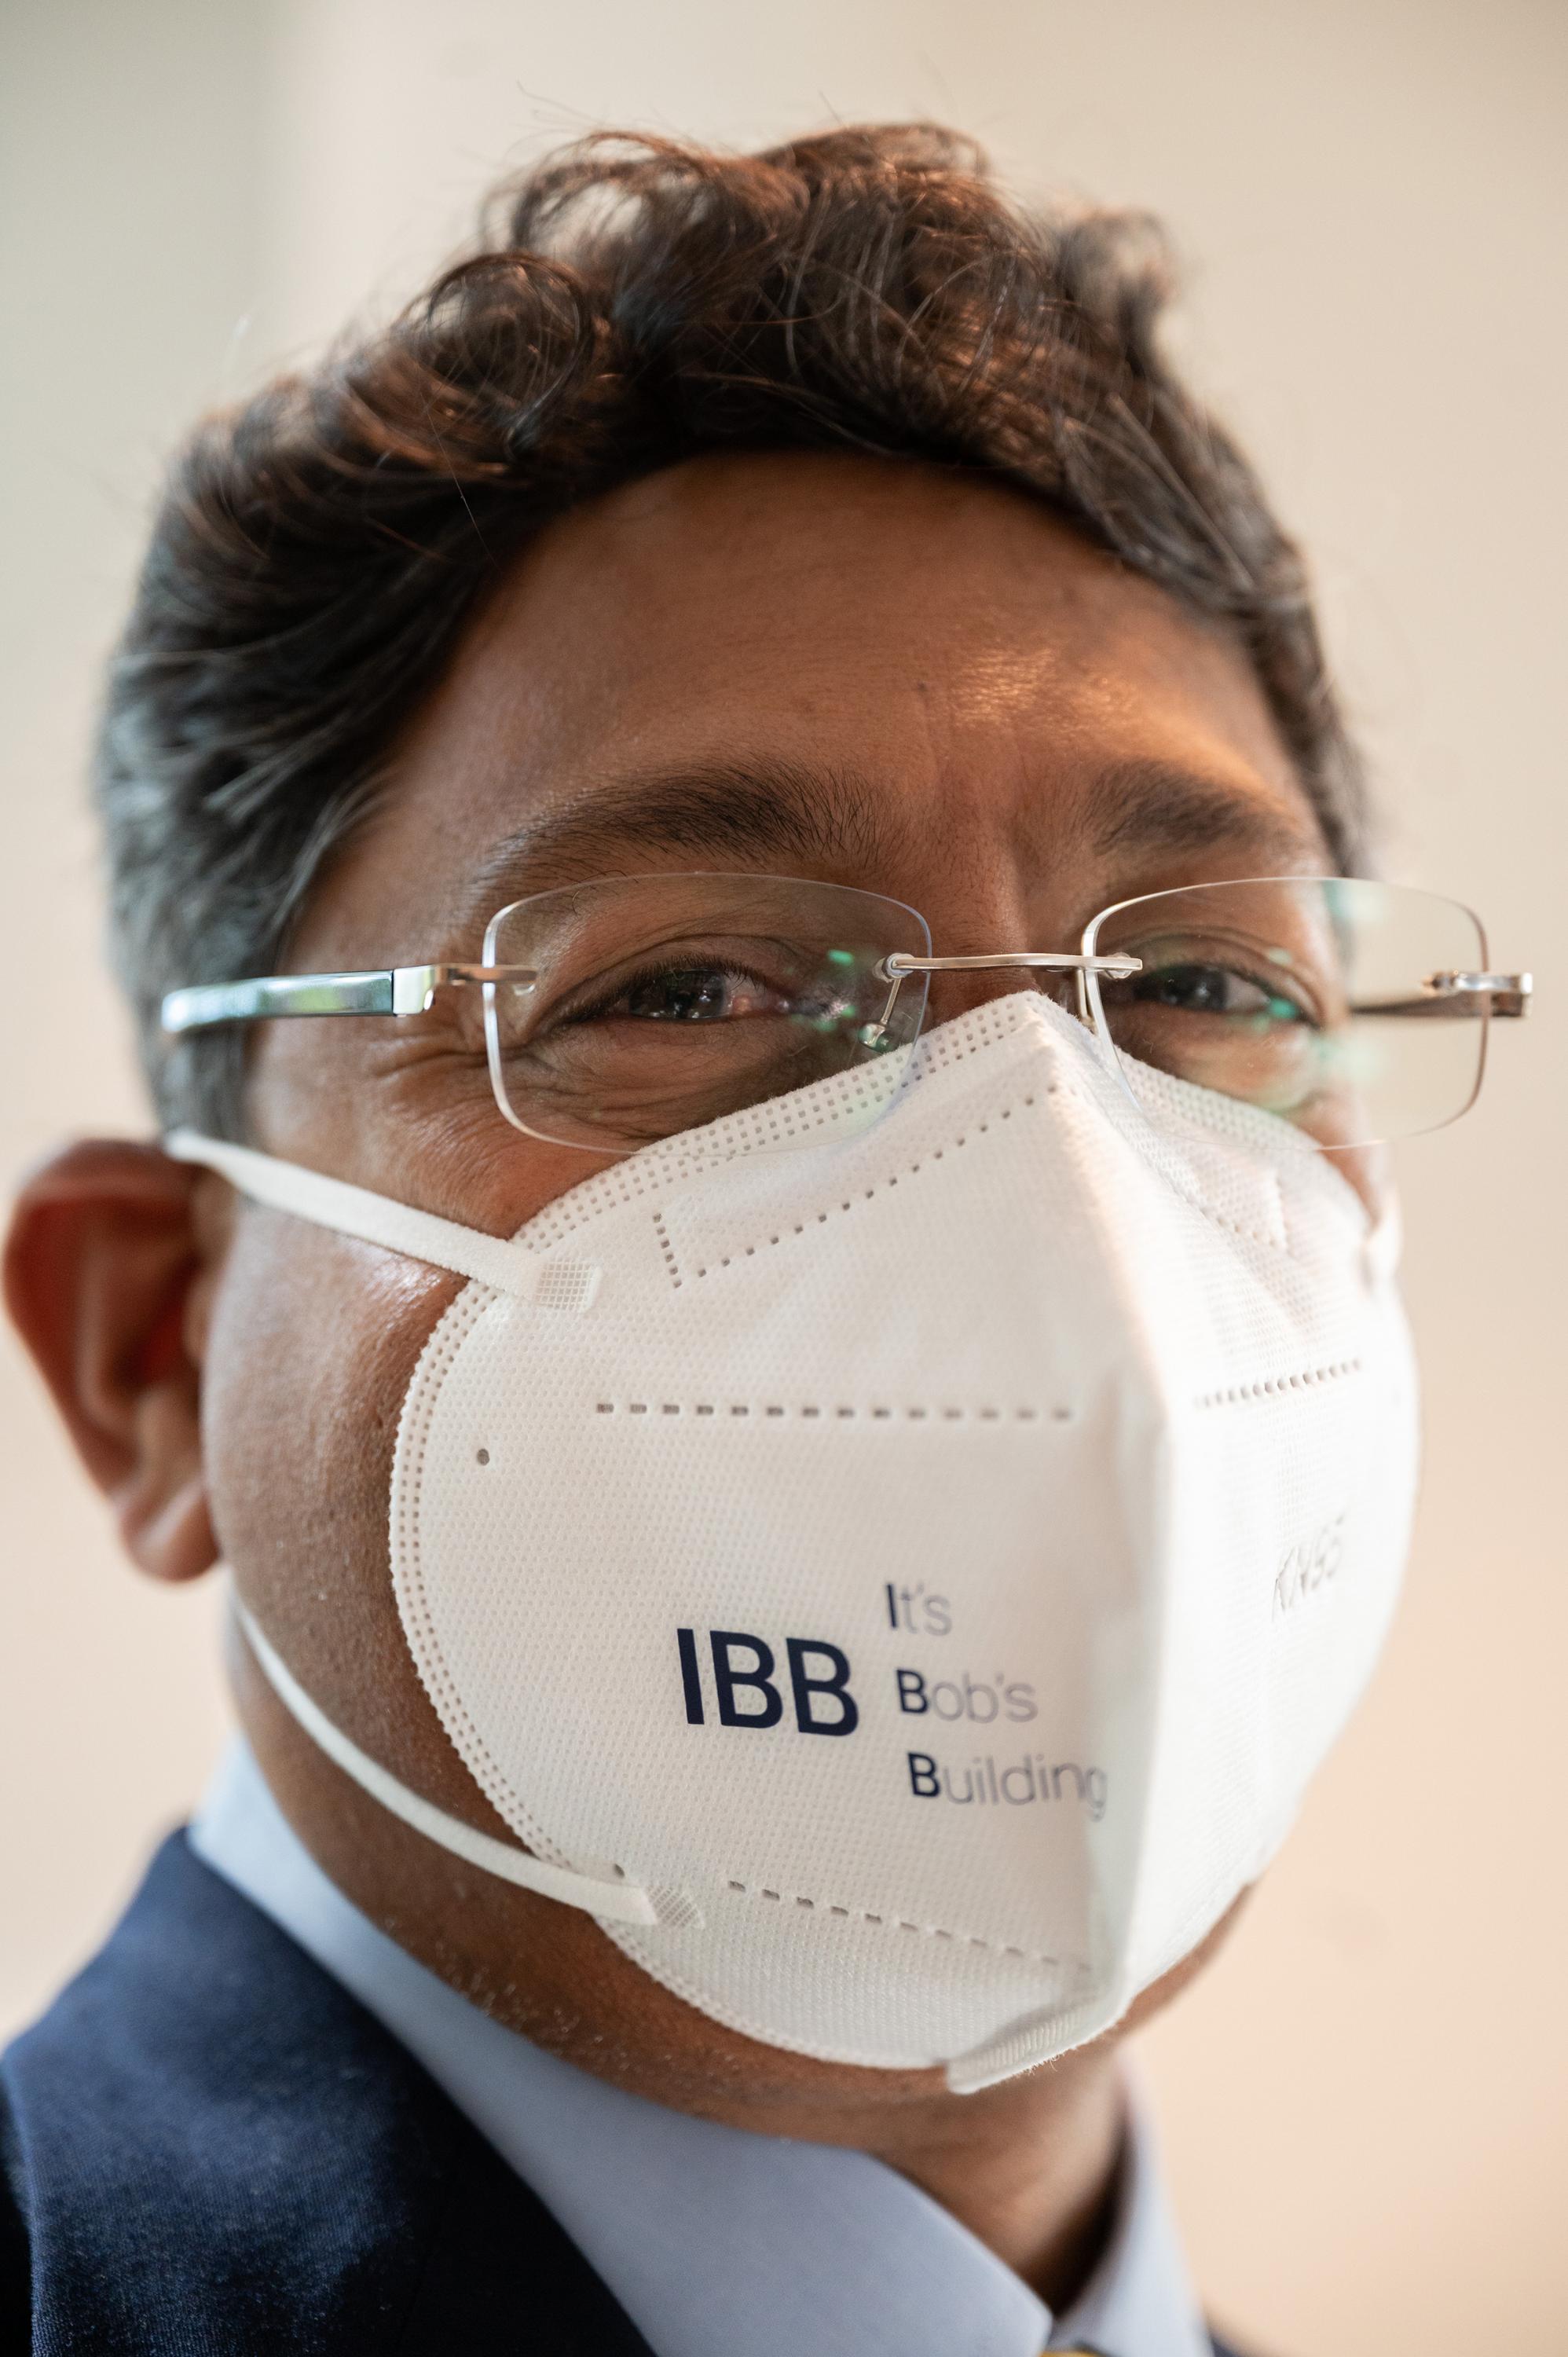 Emory provost and former chair of the Wallace H. Coulter Department of Biomedical Engineering Ravi Bellamkonda wears a mask that states plainly what everyone has been thinking for years: IBB stands for 'It's Bob's Building.'